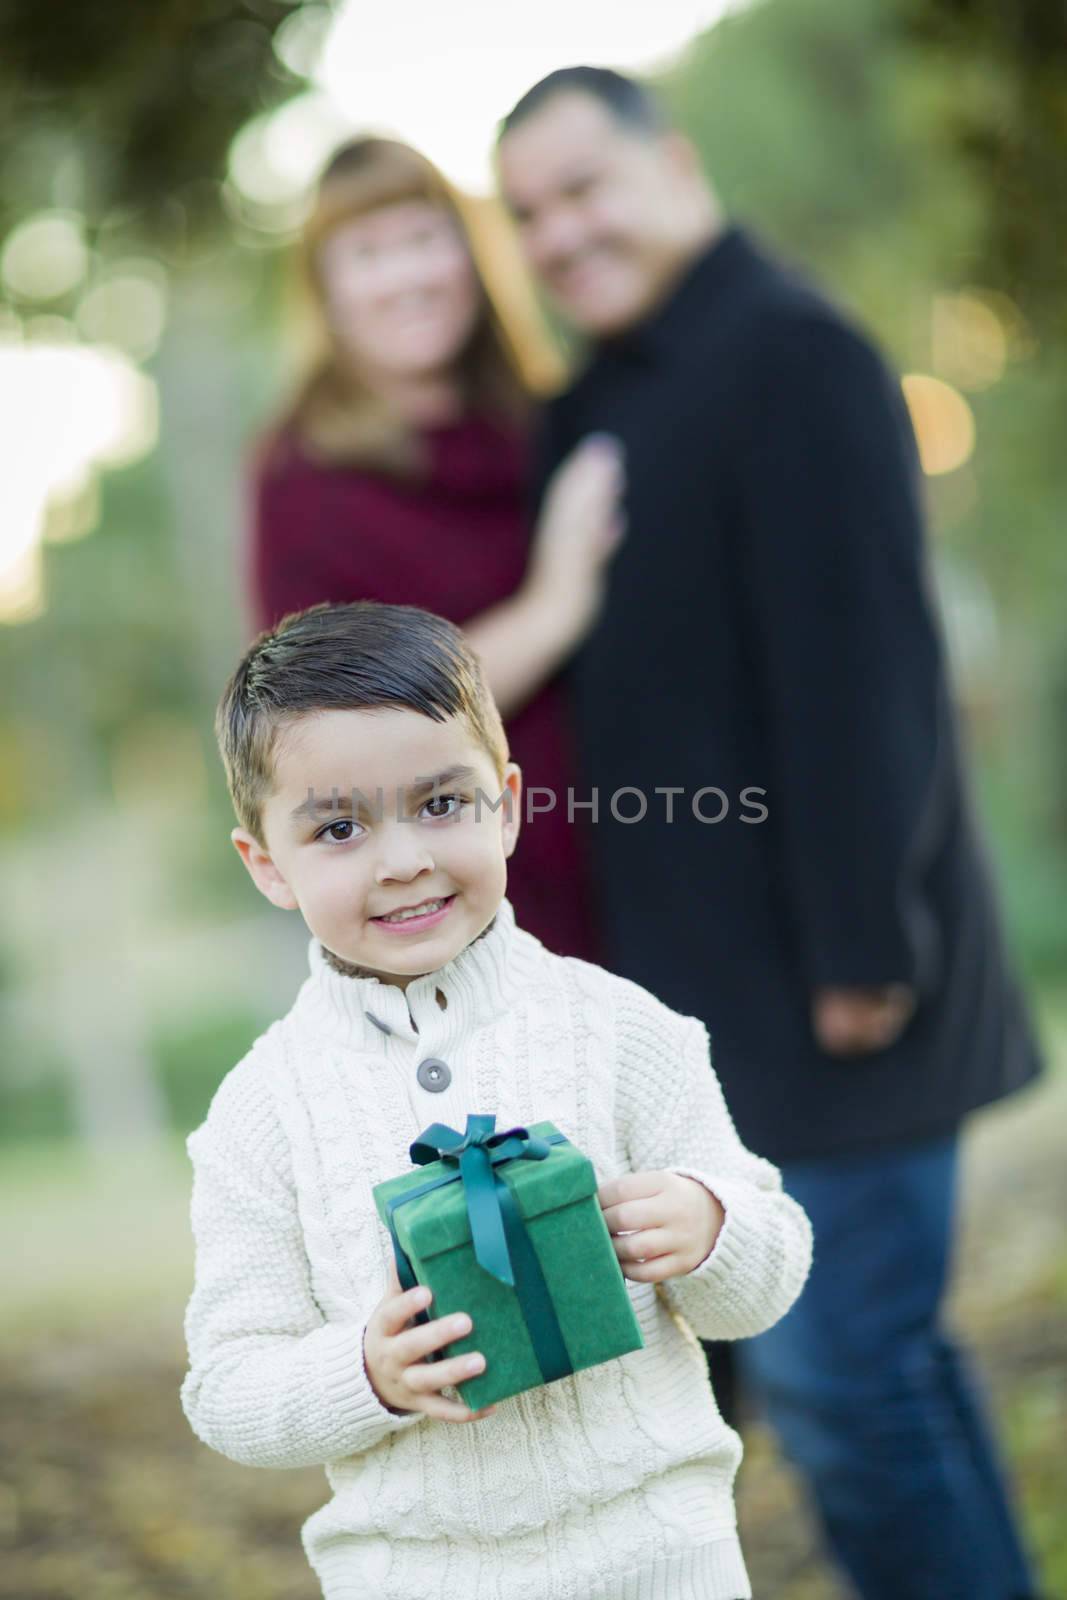 Mixed Race Boy Holding Gift In Front with Parents Behind by Feverpitched